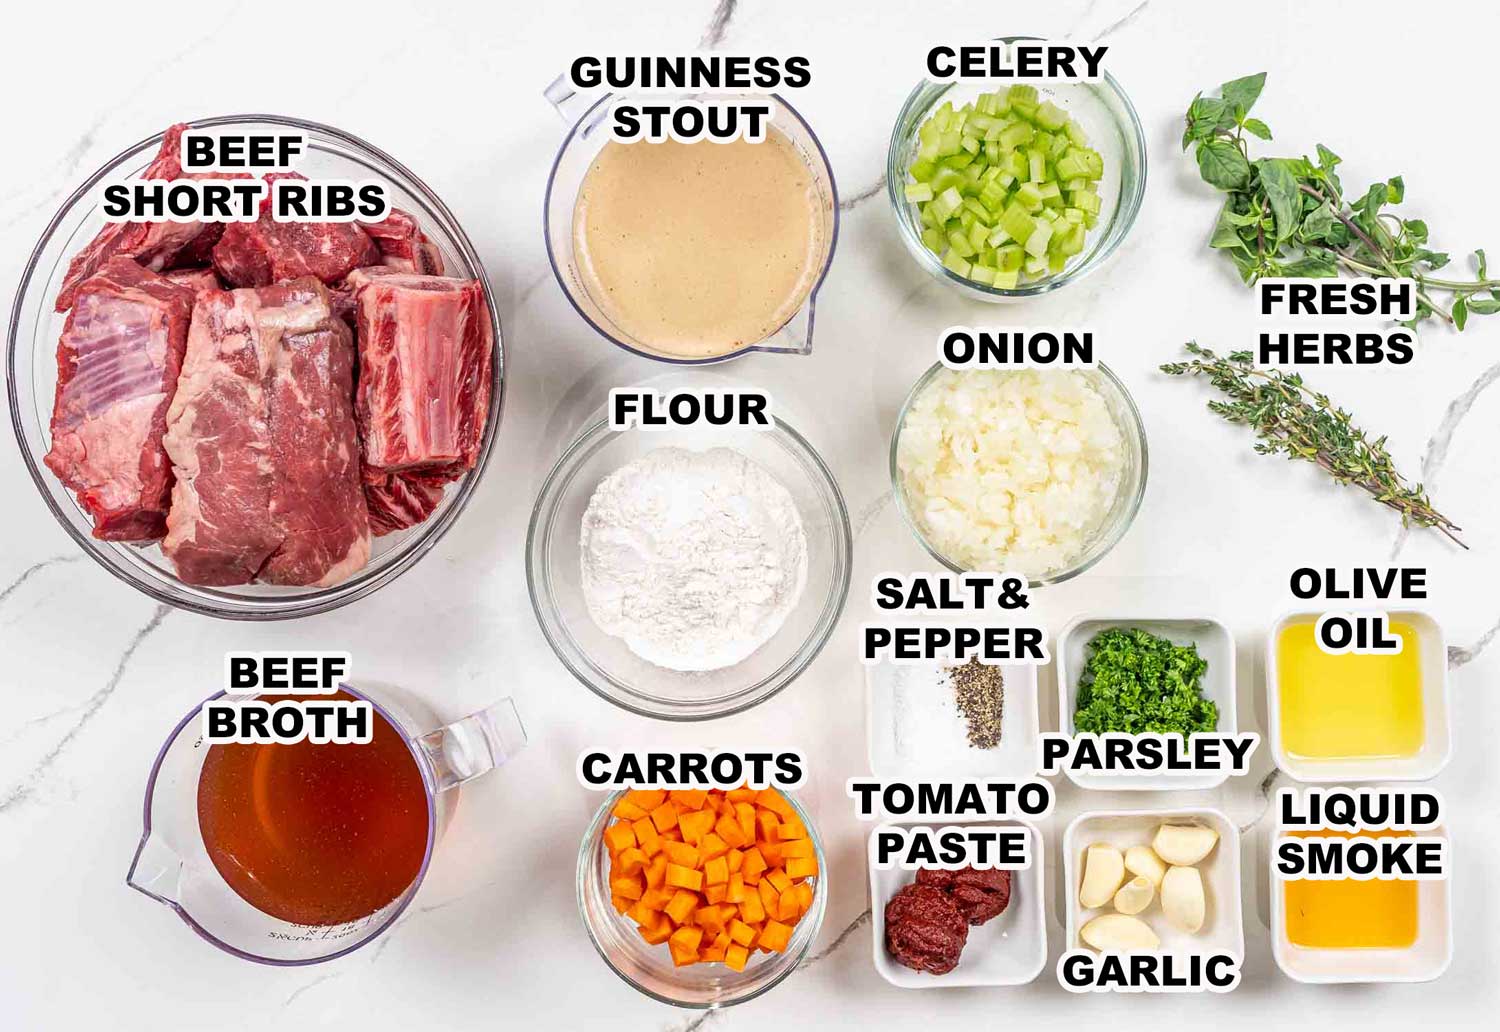 ingredients needed to make guinness braised short ribs.